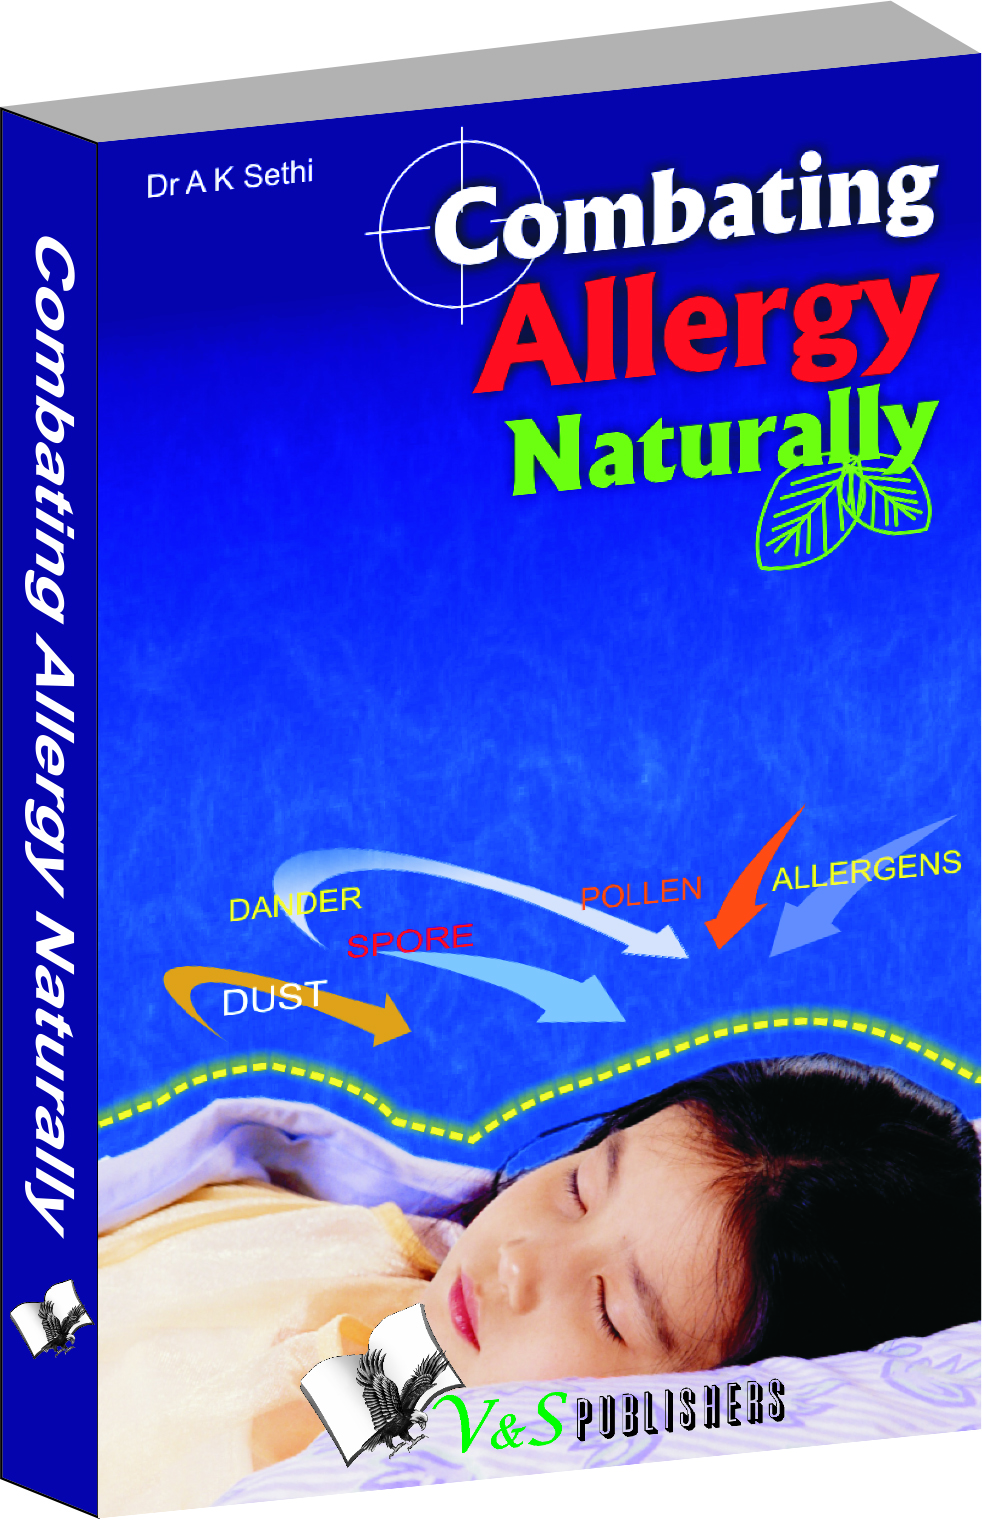 Combating Allergy Naturally-Control & manage without medicine